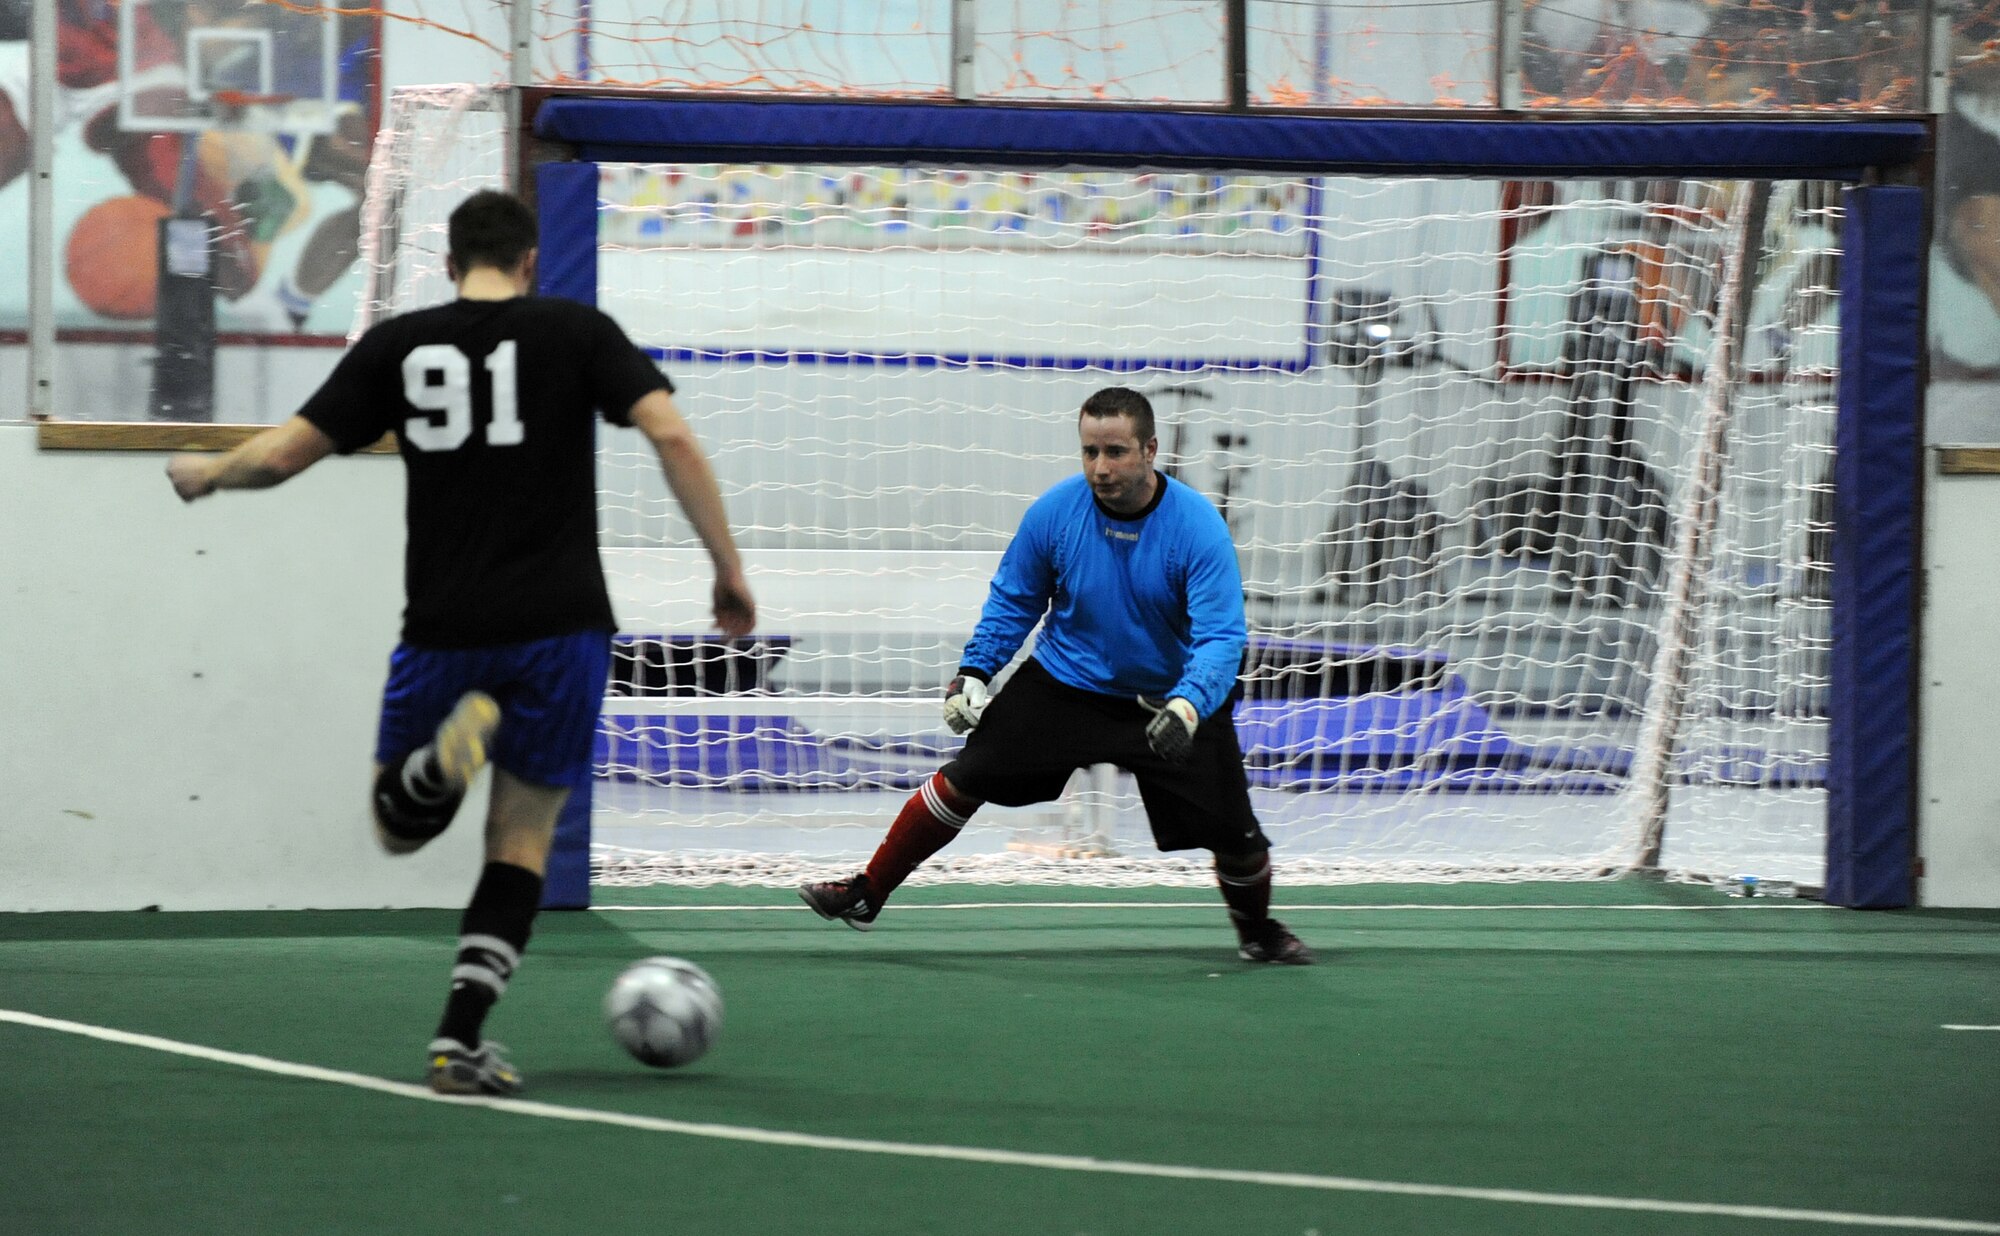 OFFUTT AIR FORCE BASE, Neb. -- Andrew Smith, U.S. Strategic Command, takes a shot on goal as goalkeeper Thomas Mooney, 55th Communications Group, prepares to make a save during the intramural soccer championship game held at the Offutt Field House, Feb. 2.  The intramural soccer league ended with  STRATCOM defeating the 55th CG 4-1.

U.S. Air Force Photo by Josh Plueger